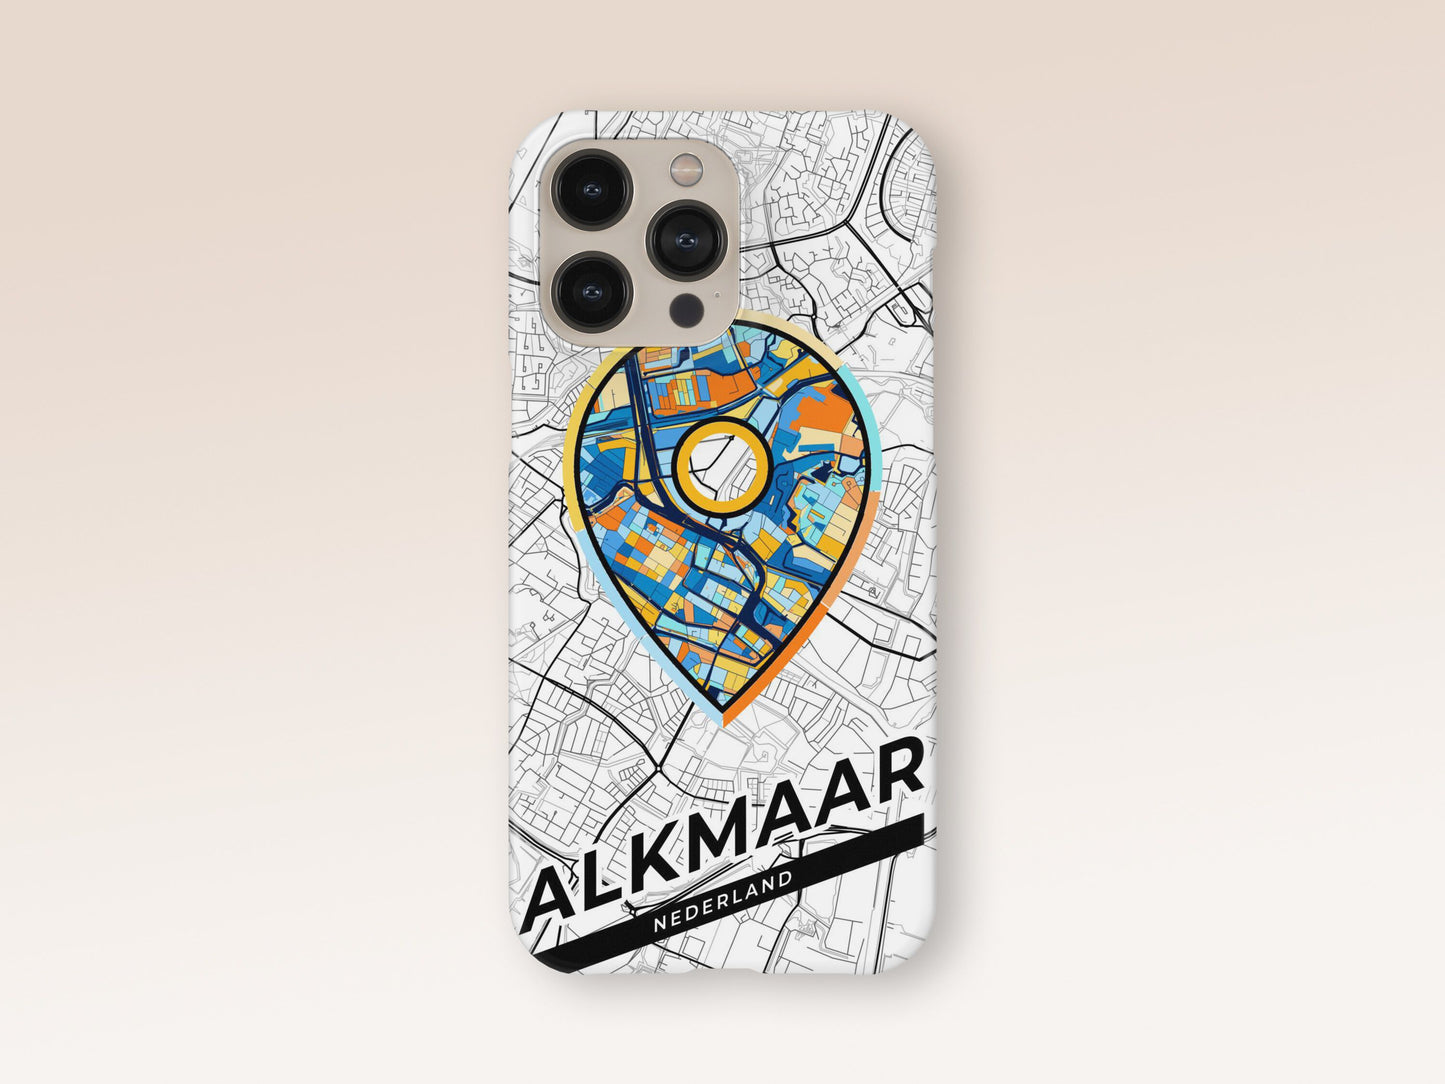 Alkmaar Netherlands slim phone case with colorful icon. Birthday, wedding or housewarming gift. Couple match cases. 1